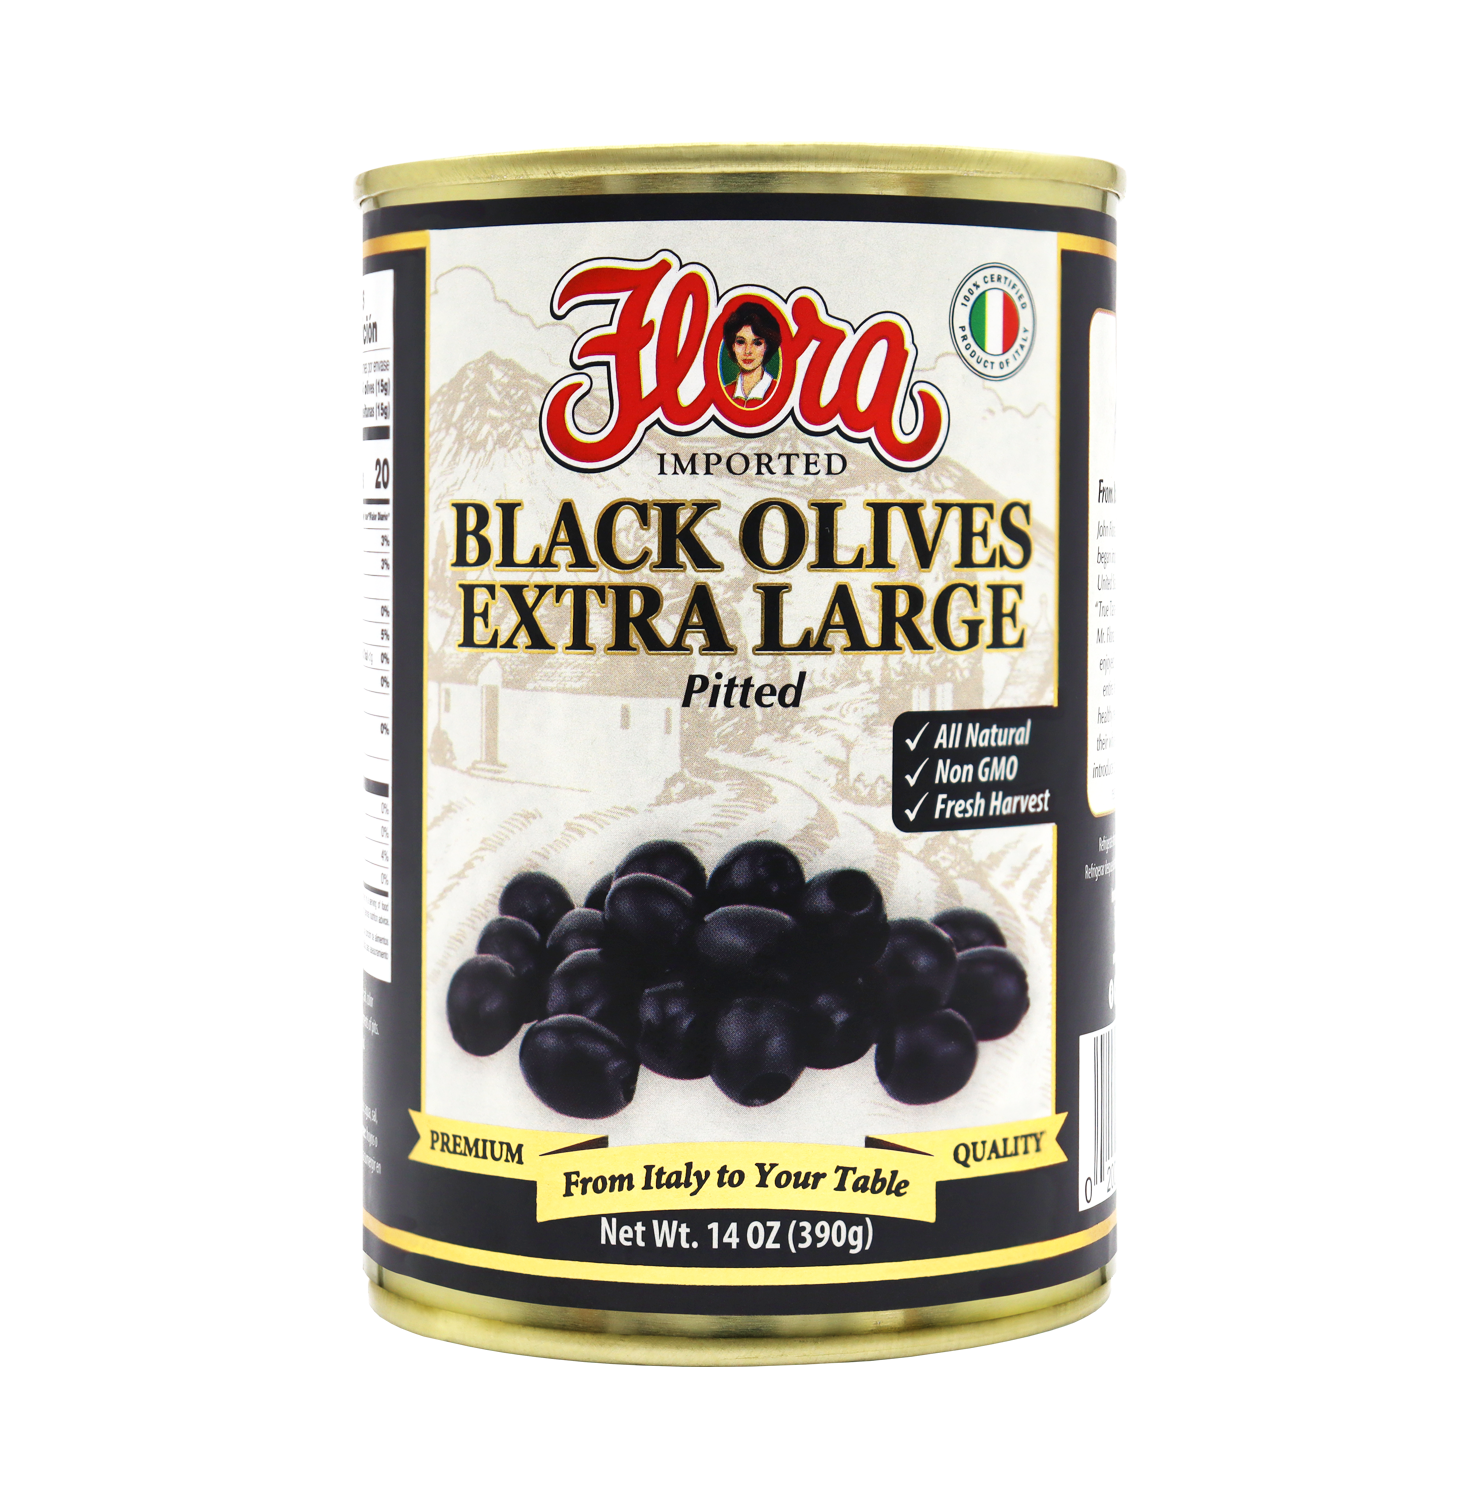 PITTED RIPE OLIVES